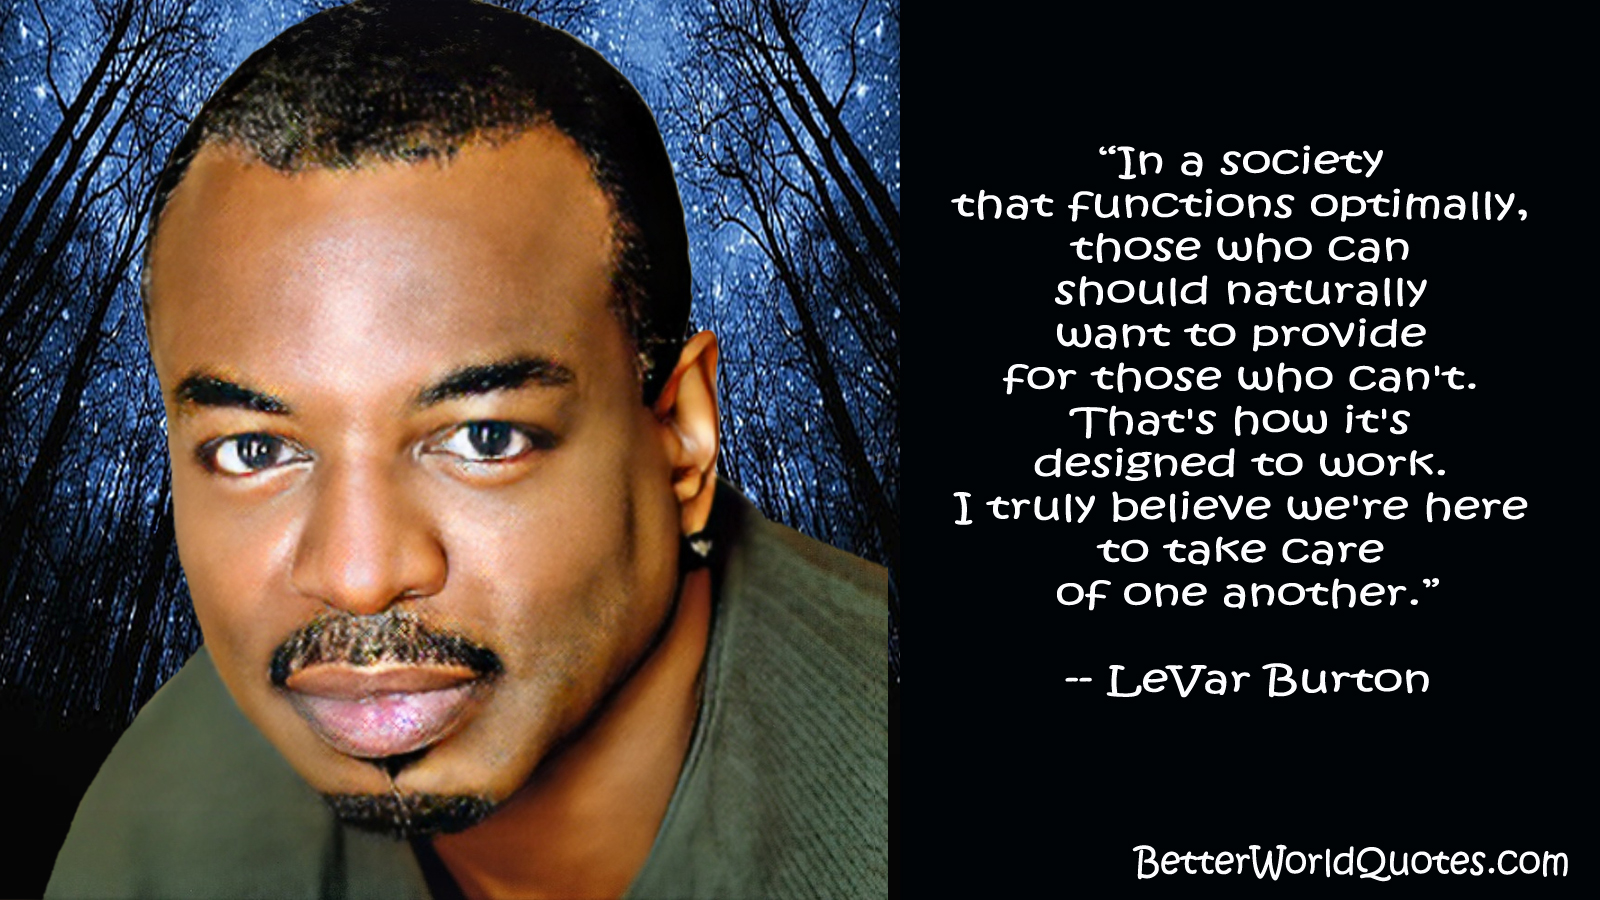 LeVar Burton: In a society that functions optimally, those who can should naturally want to provide for those who can't. That's how it's designed to work. I truly believe we're here to take care of one another.